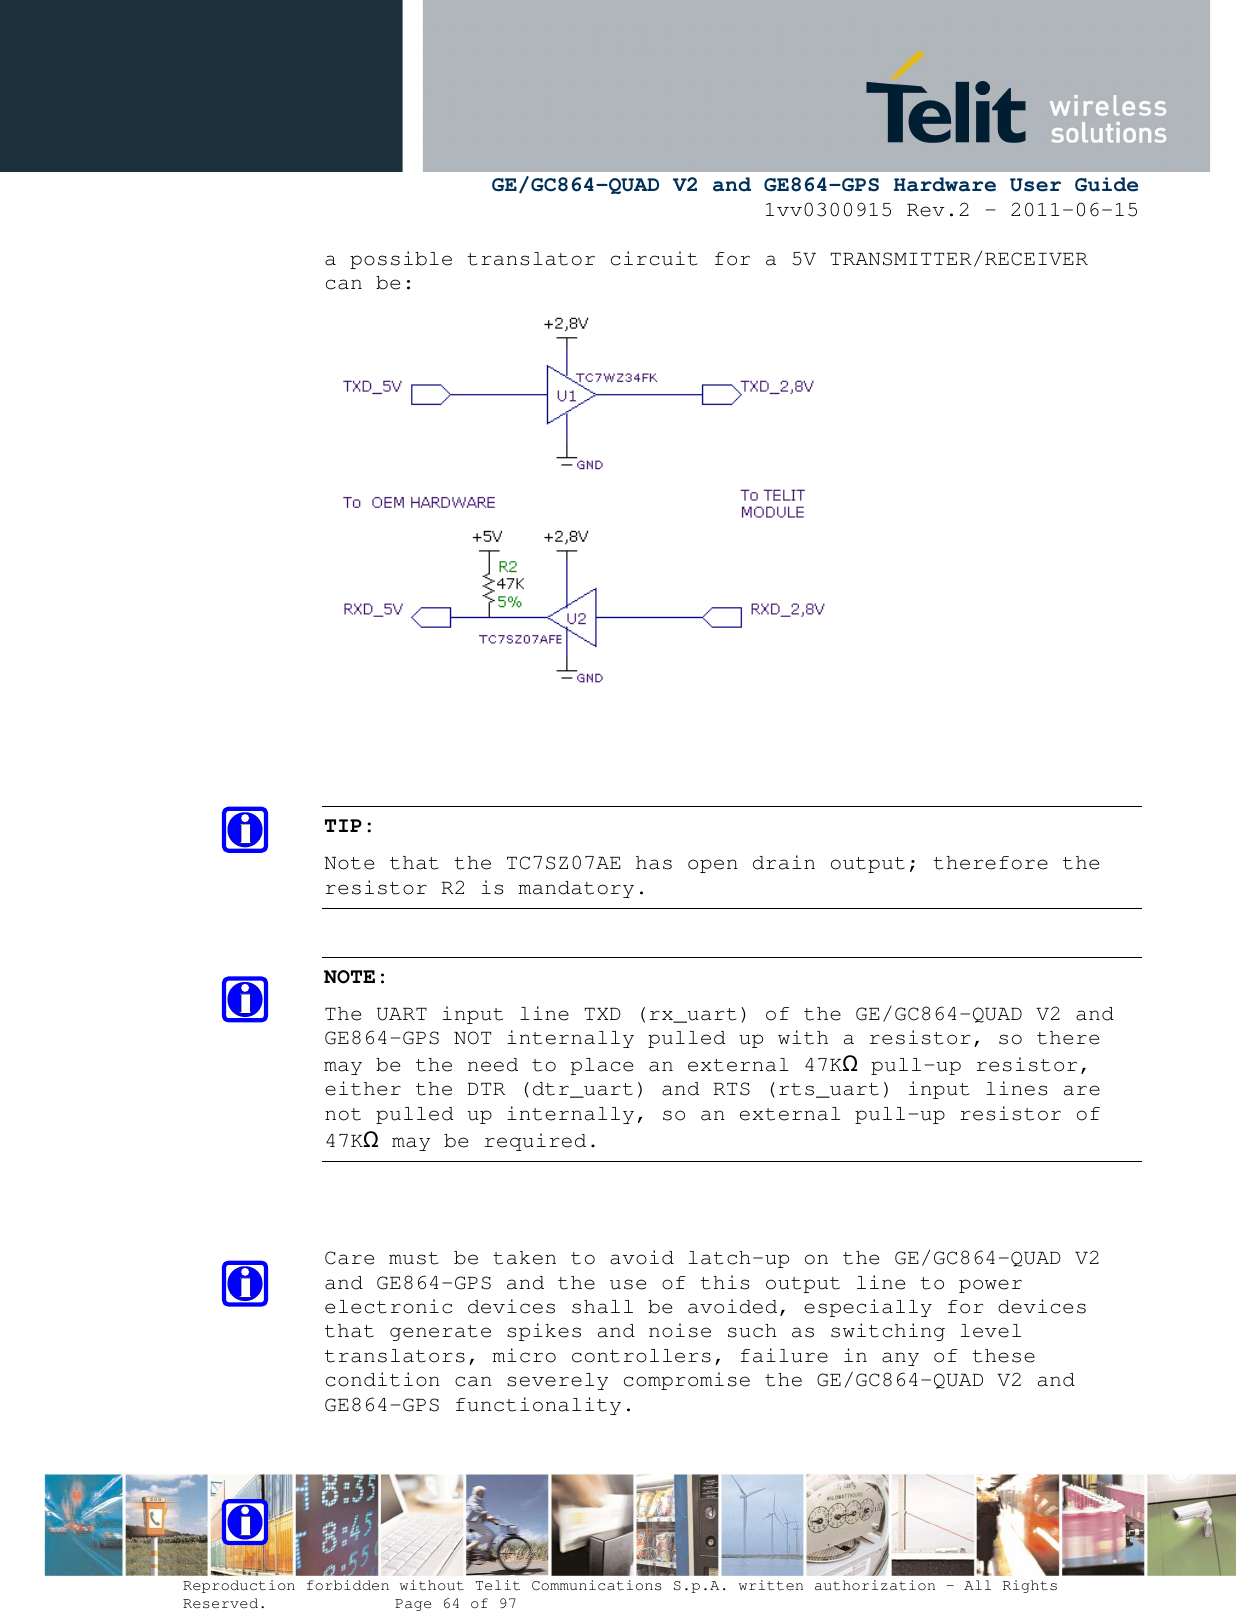      GE/GC864-QUAD V2 and GE864-GPS Hardware User Guide 1vv0300915 Rev.2 – 2011-06-15  Reproduction forbidden without Telit Communications S.p.A. written authorization - All Rights Reserved.    Page 64 of 97  a possible translator circuit for a 5V TRANSMITTER/RECEIVER can be:     TIP: Note that the TC7SZ07AE has open drain output; therefore the resistor R2 is mandatory.  NOTE: The UART input line TXD (rx_uart) of the GE/GC864-QUAD V2 and GE864-GPS NOT internally pulled up with a resistor, so there may be the need to place an external 47KΩ pull-up resistor, either the DTR (dtr_uart) and RTS (rts_uart) input lines are not pulled up internally, so an external pull-up resistor of 47KΩ may be required.   Care must be taken to avoid latch-up on the GE/GC864-QUAD V2 and GE864-GPS and the use of this output line to power electronic devices shall be avoided, especially for devices that generate spikes and noise such as switching level translators, micro controllers, failure in any of these condition can severely compromise the GE/GC864-QUAD V2 and GE864-GPS functionality. 